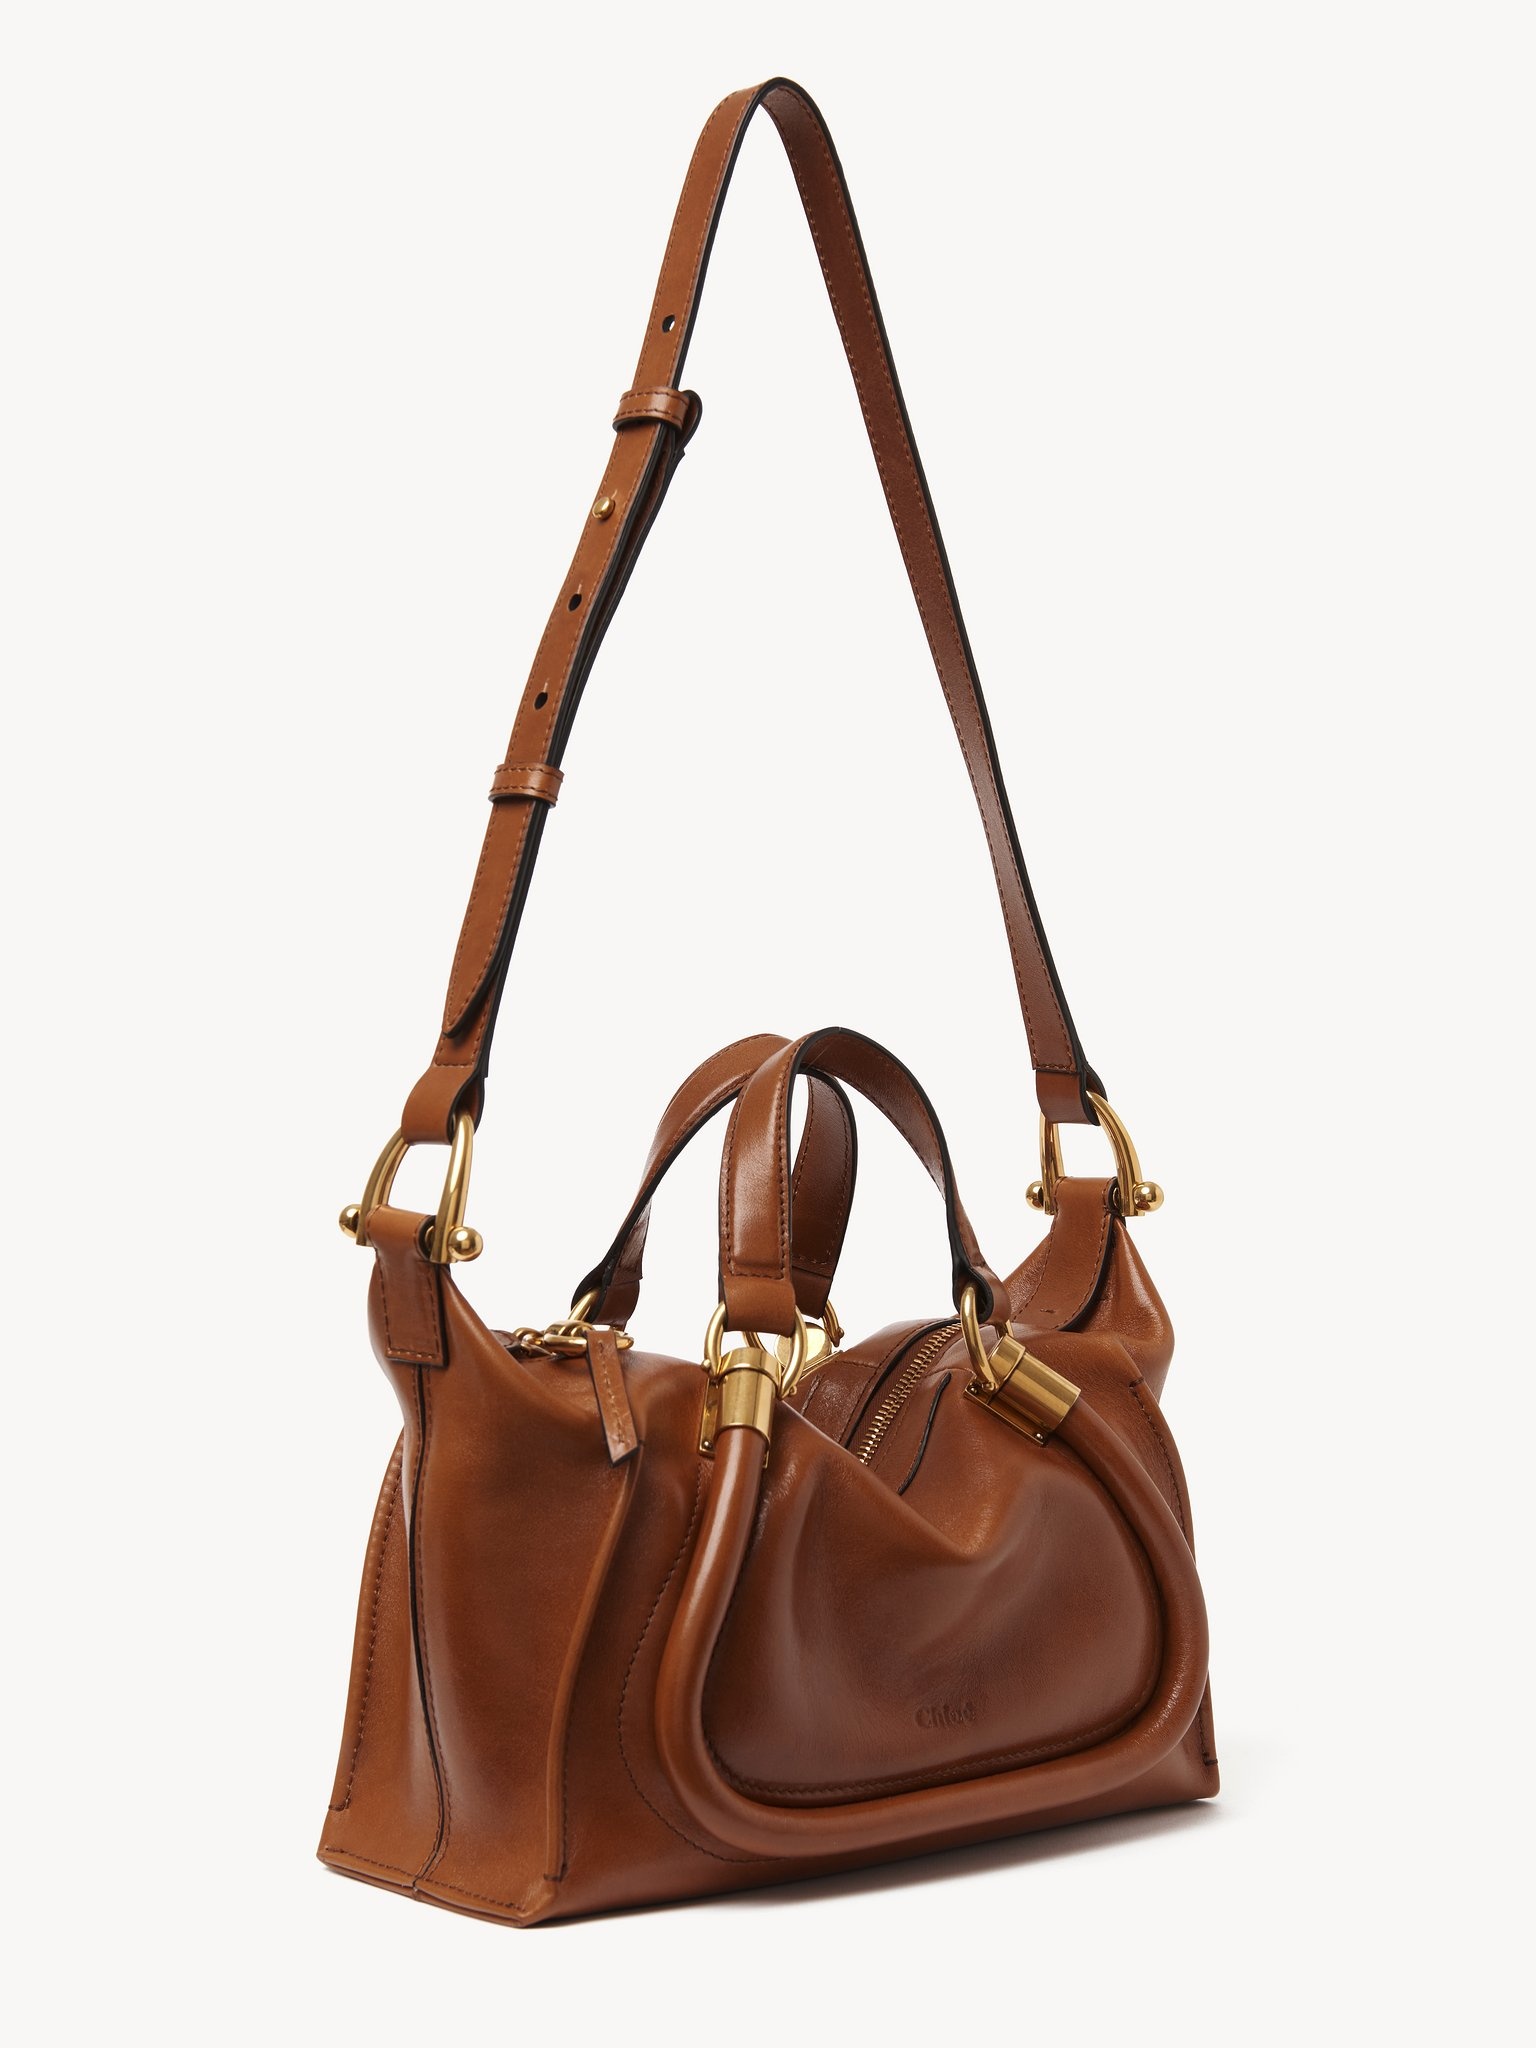 SMALL PARATY 24 BAG IN SOFT LEATHER - 3